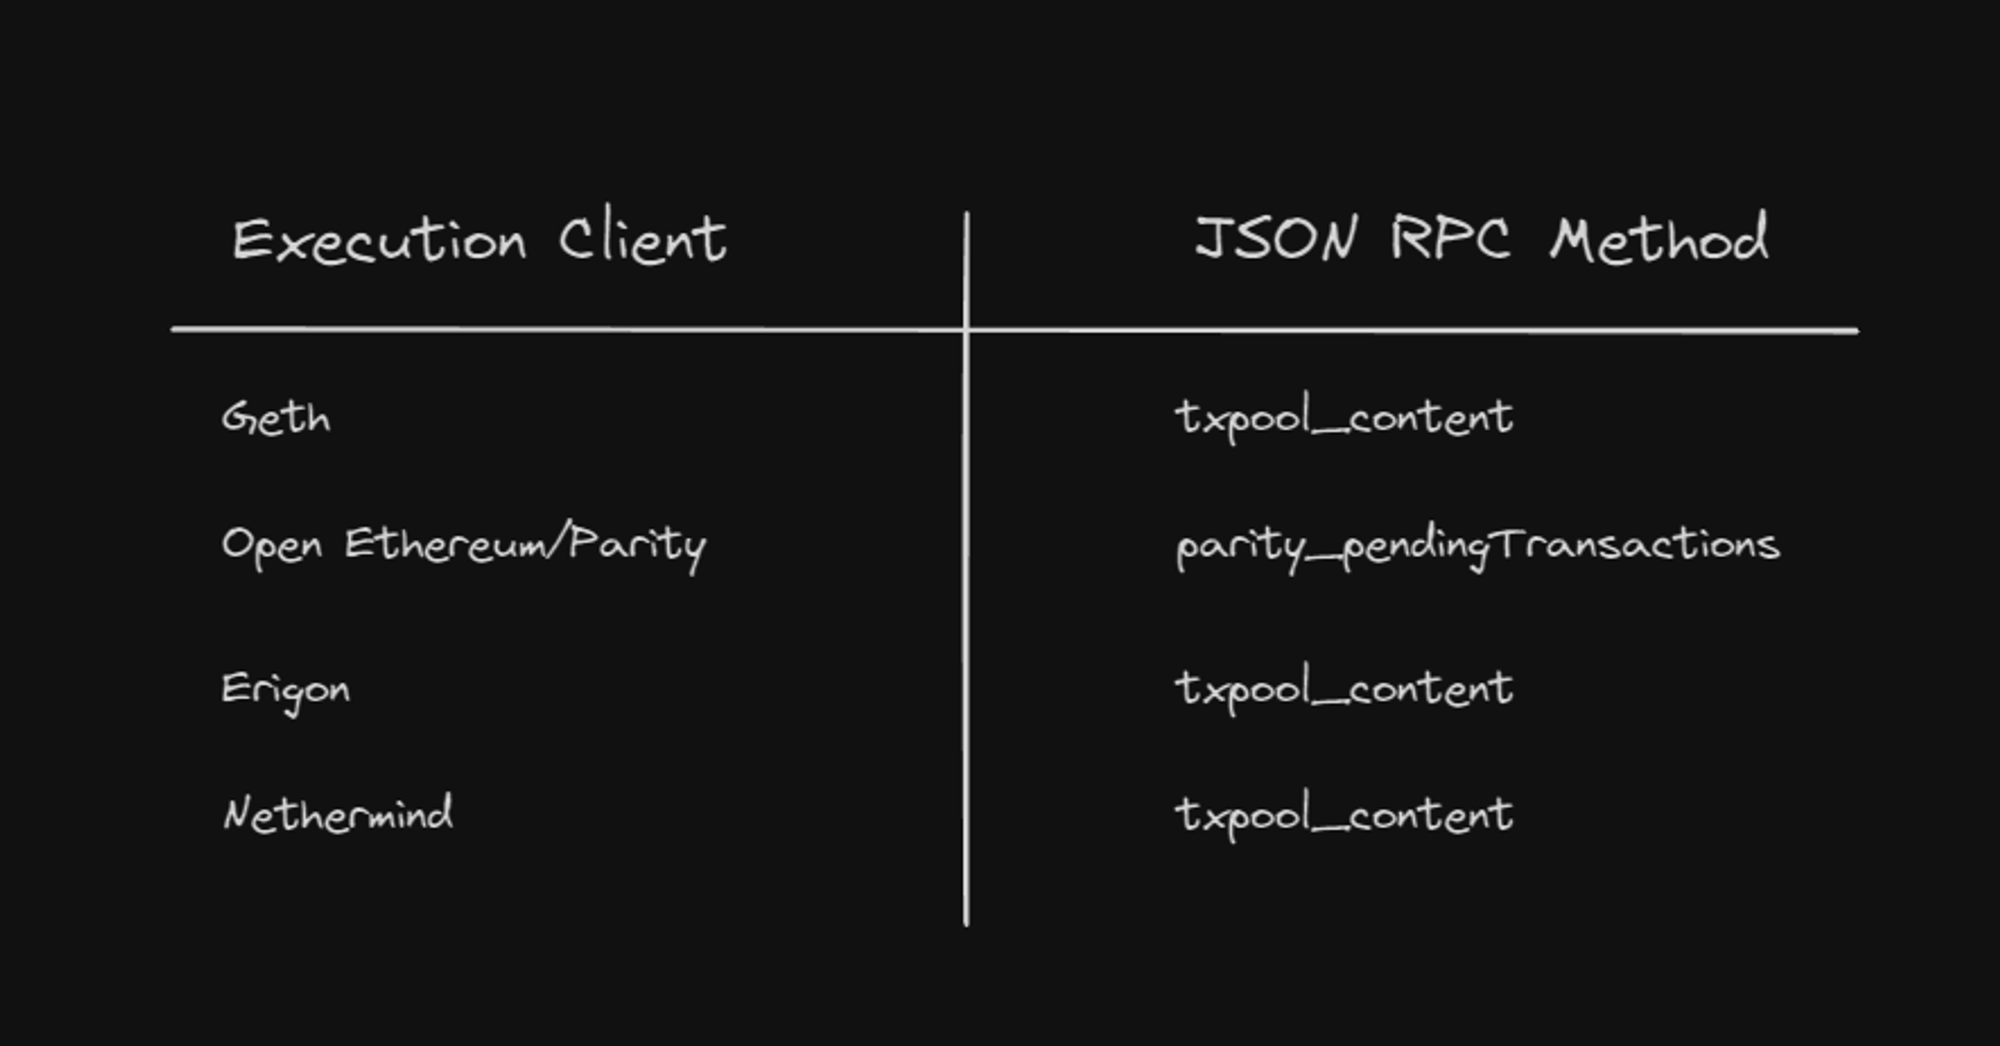 List JSON RPC method for each execution client to get the mempool transaction from the node